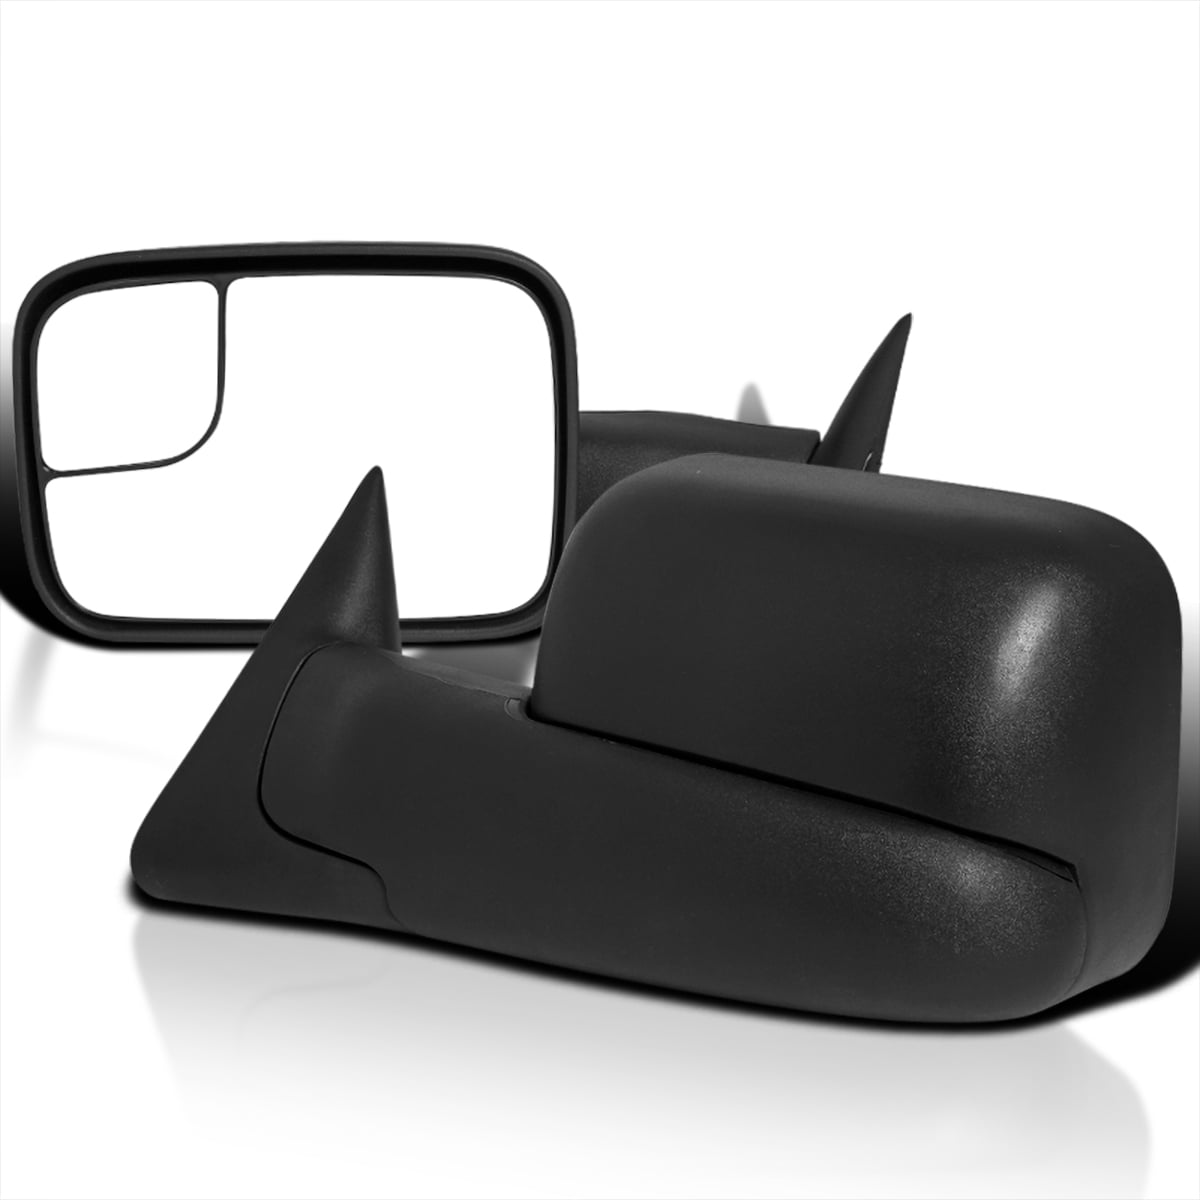 ECCPP Towing Mirrors W/Brackets Replacement fit for 1998 1999 2000 2001 Dodge Ram 1500 2500 3500 Truck Power Heated Black Manual Side View Mirrors